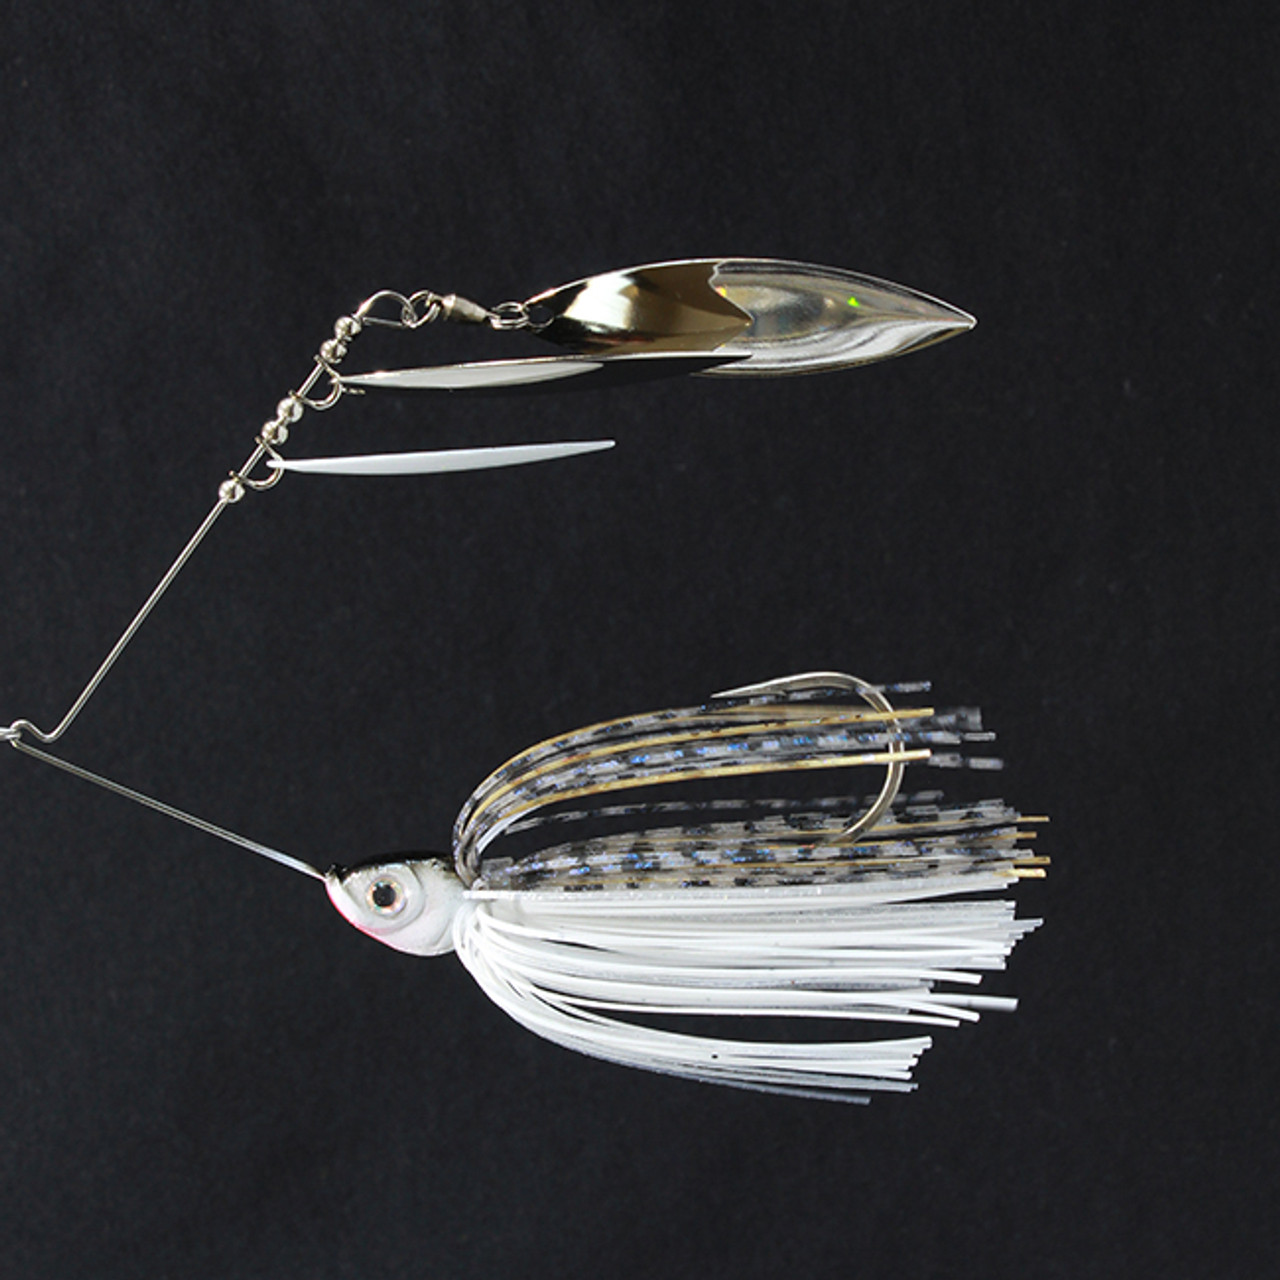 ScatterShad™ FH-3 Spinnerbait For Bass Fishing